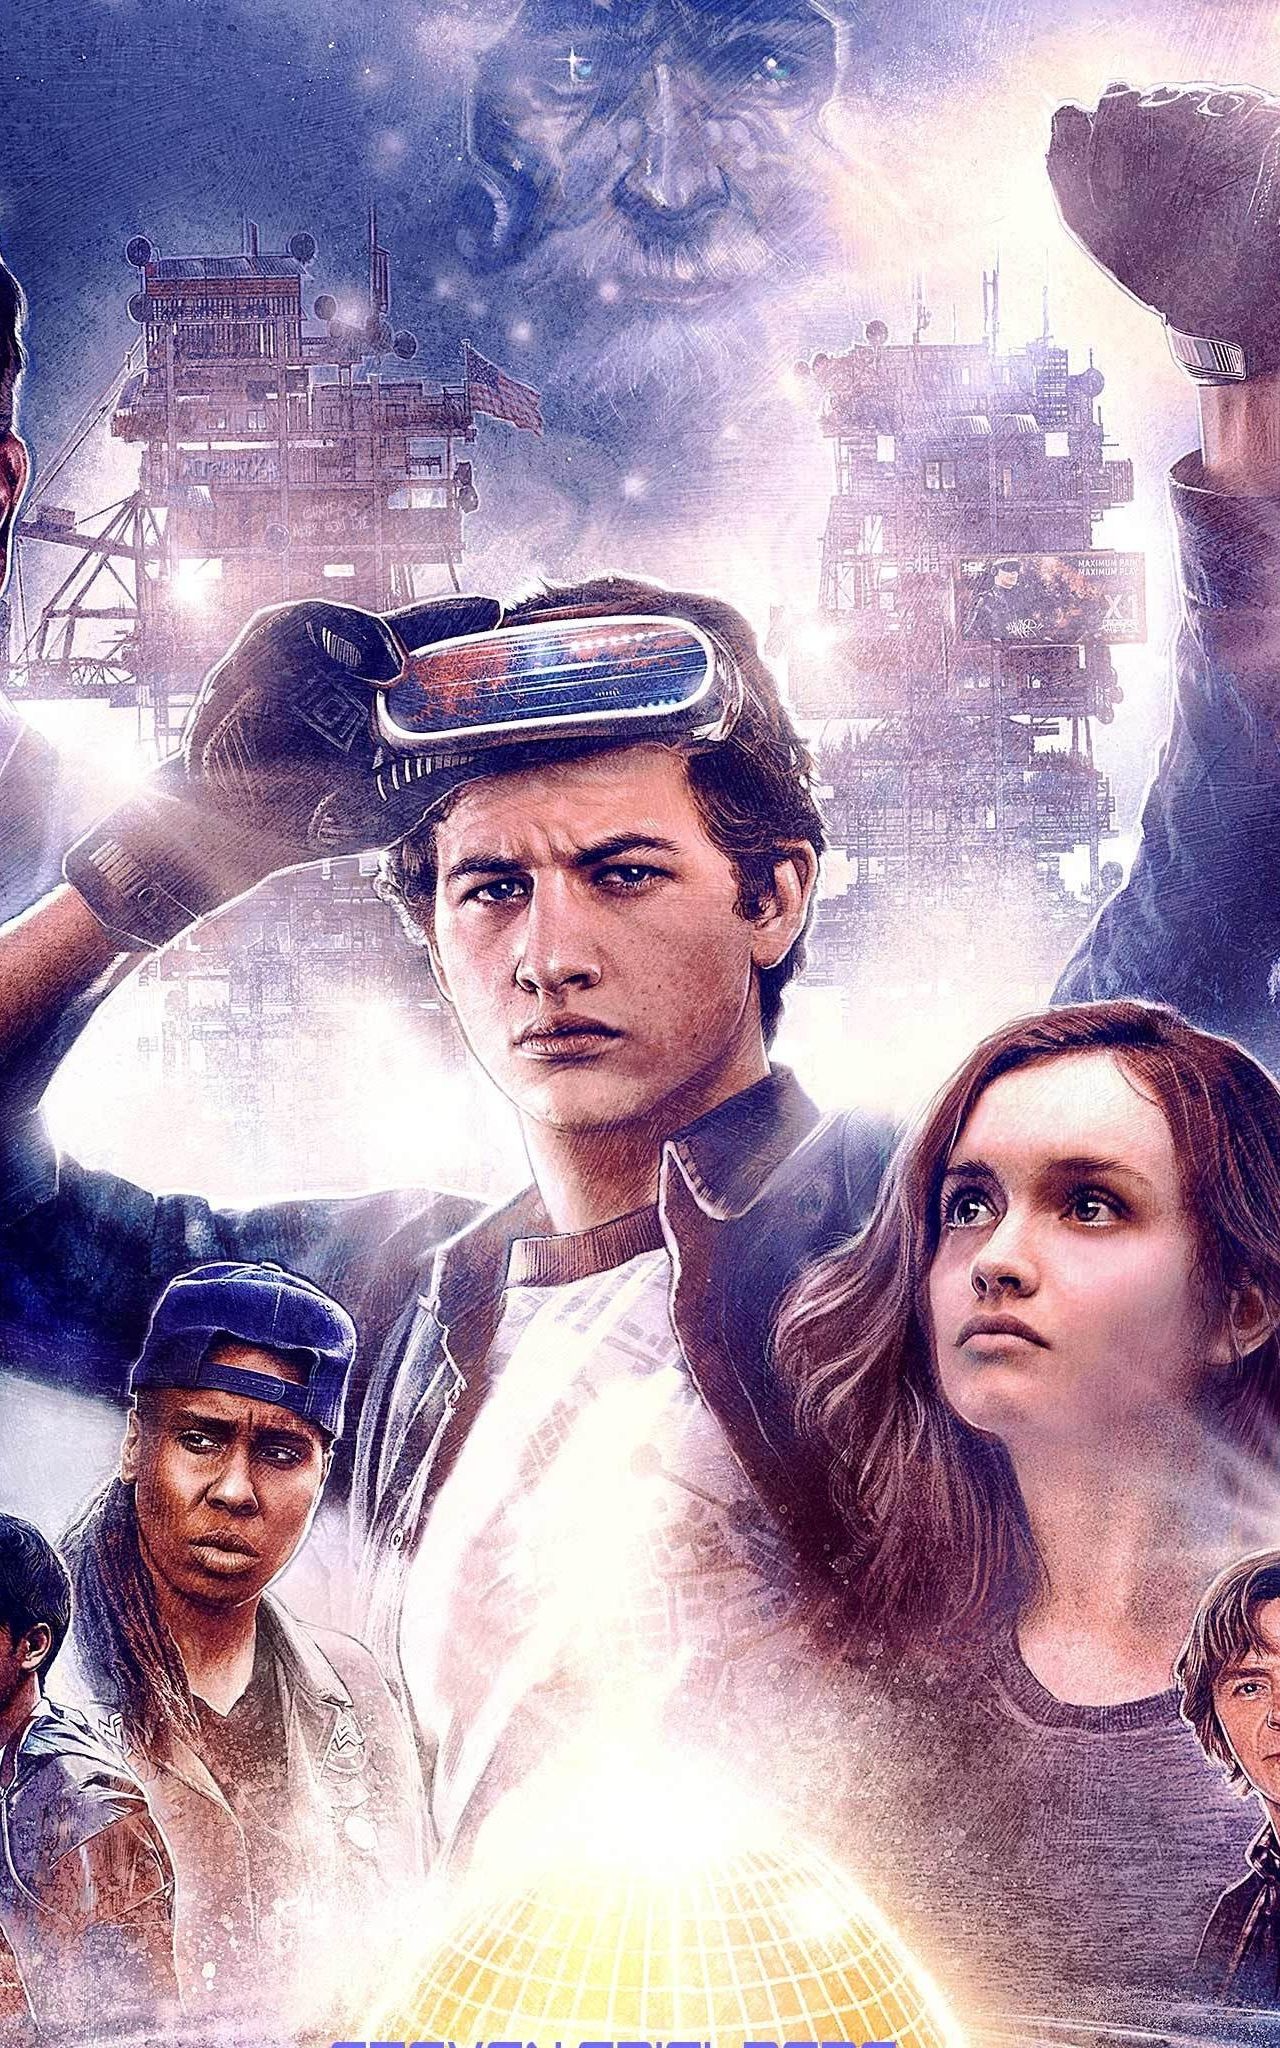 Download 1280x2120 wallpaper ready player one, 2018 movie, 80's style poster, art, iphone 6 plus, 1280x2120 HD image, background, 3101